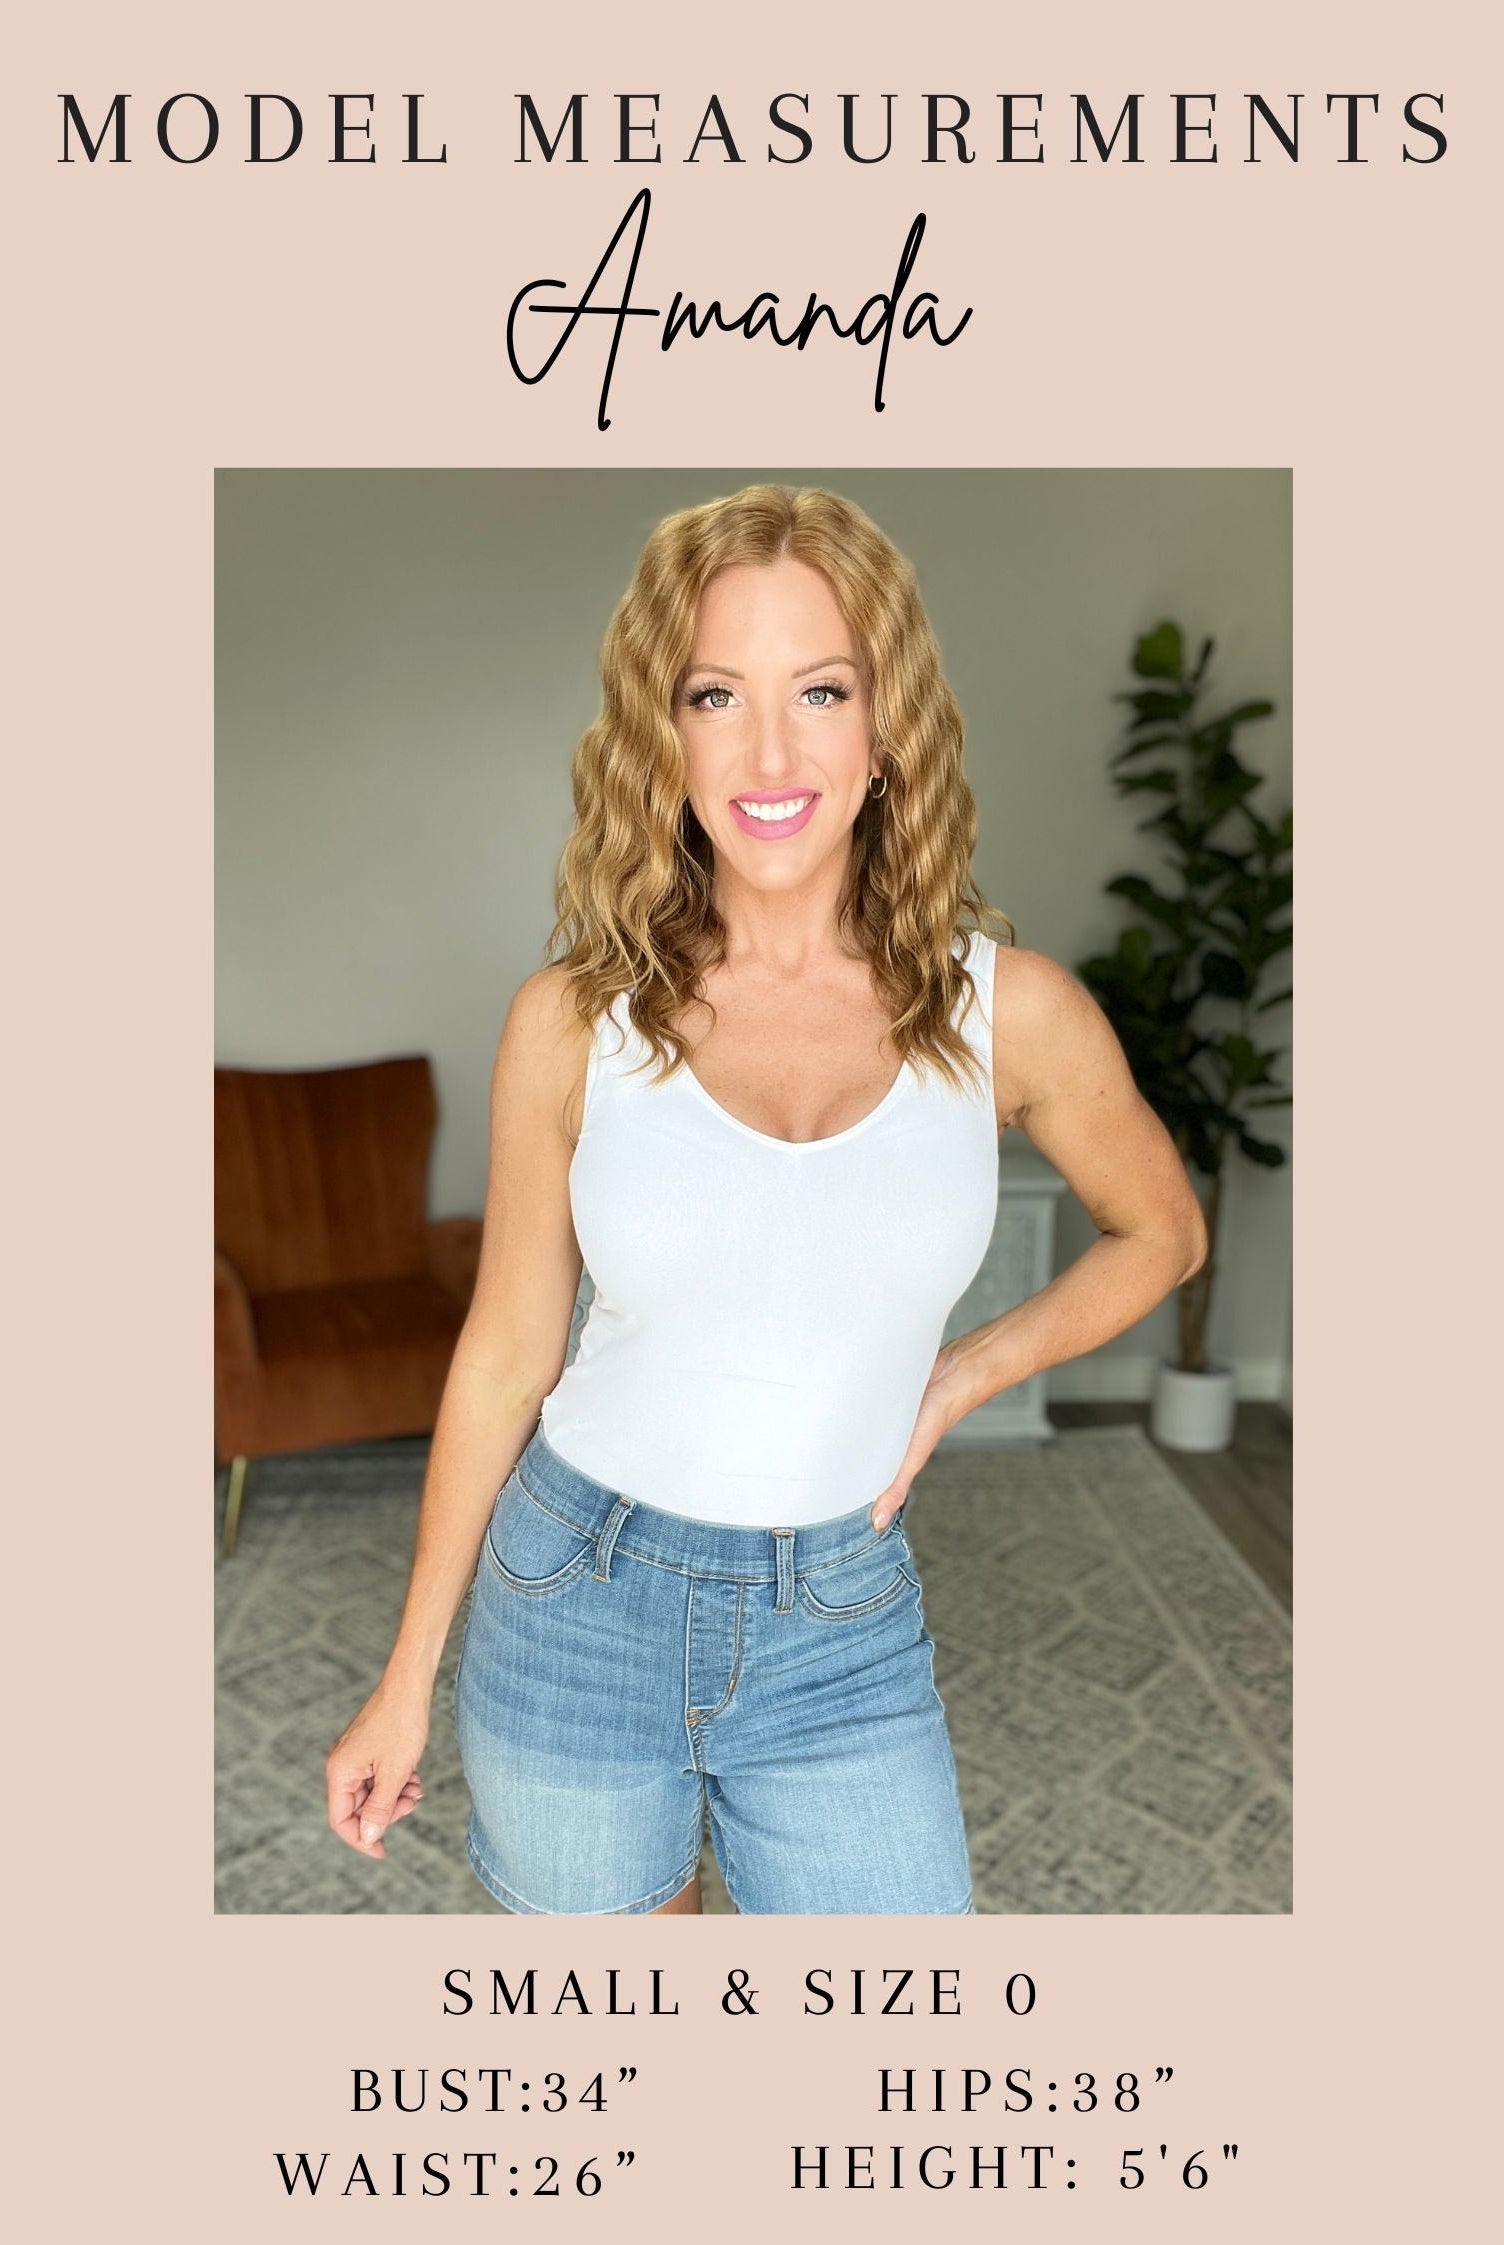 JUDY BLUE Whitney High Rise Distressed Wide Leg Crop Jeans-Jeans-Krush Kandy, Women's Online Fashion Boutique Located in Phoenix, Arizona (Scottsdale Area)